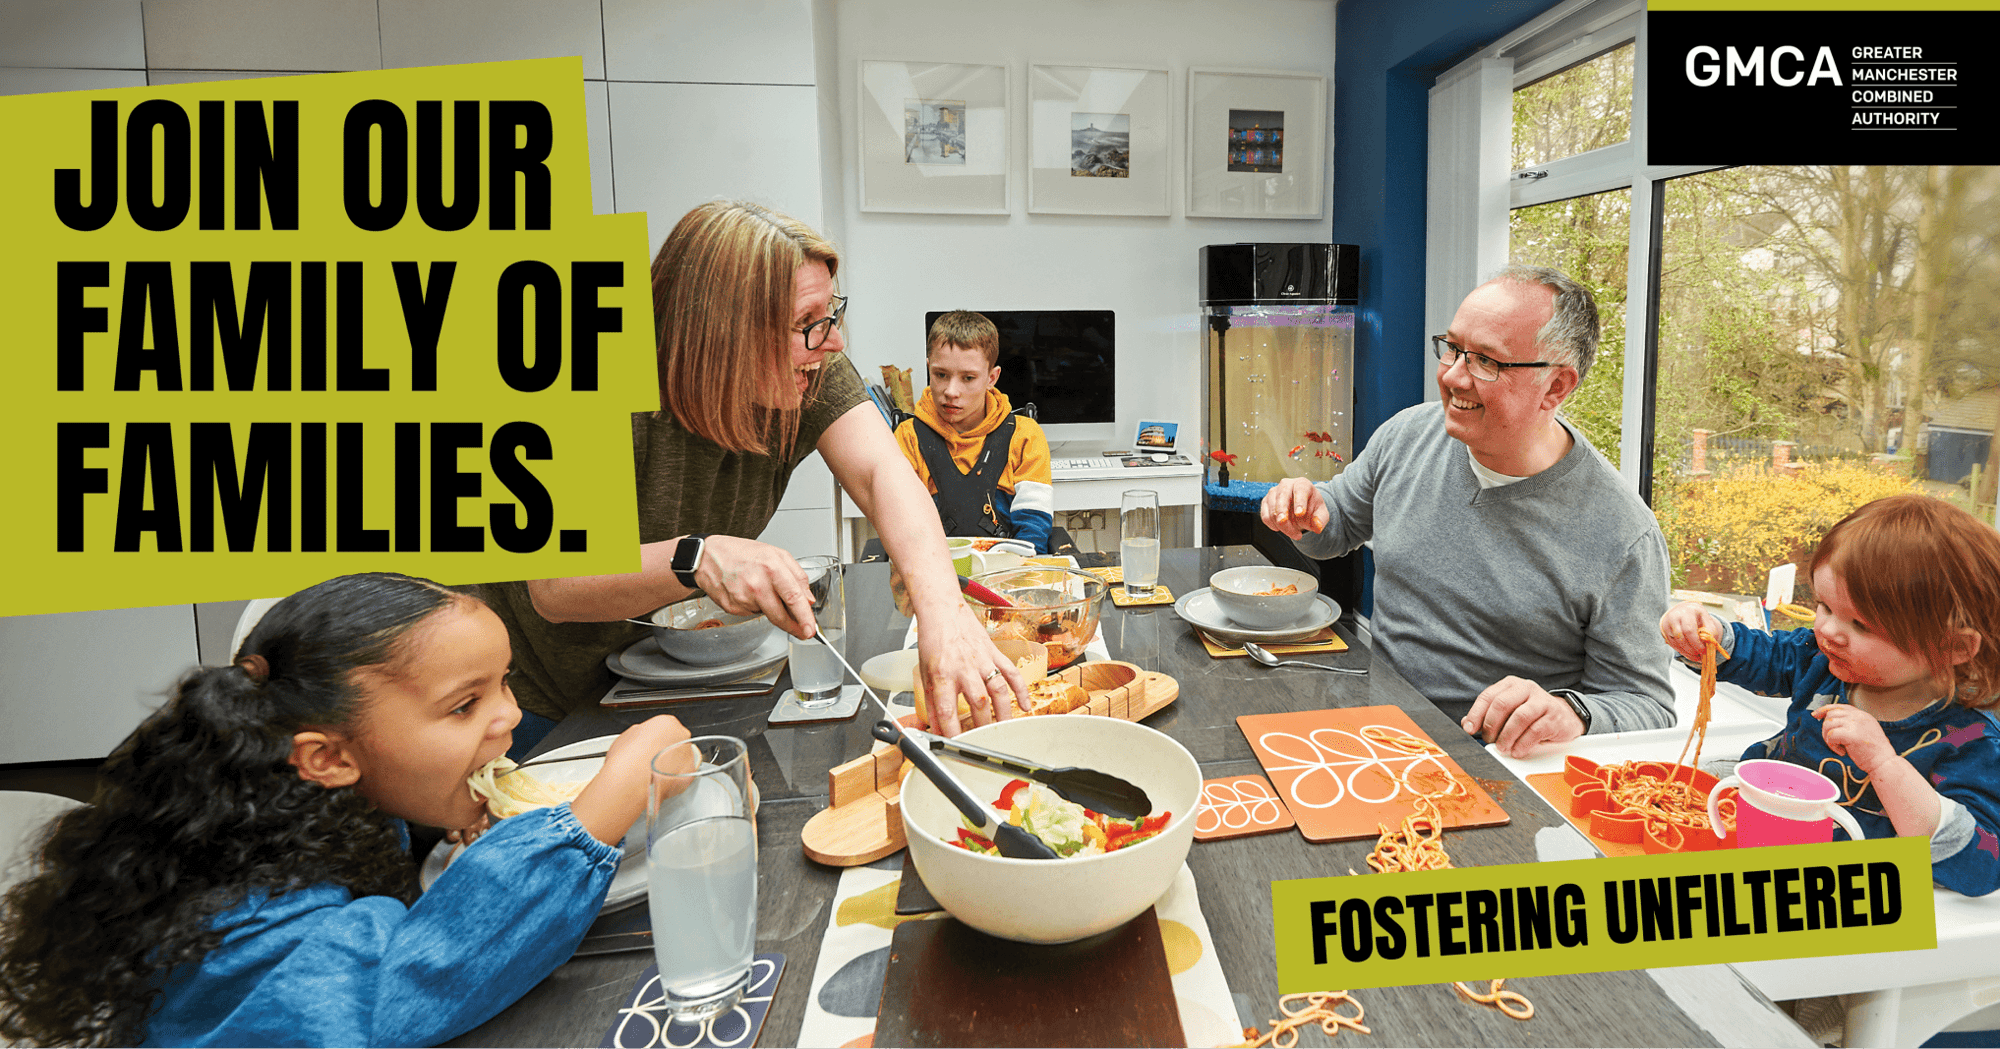 The fostering unfiltered campaign poster.